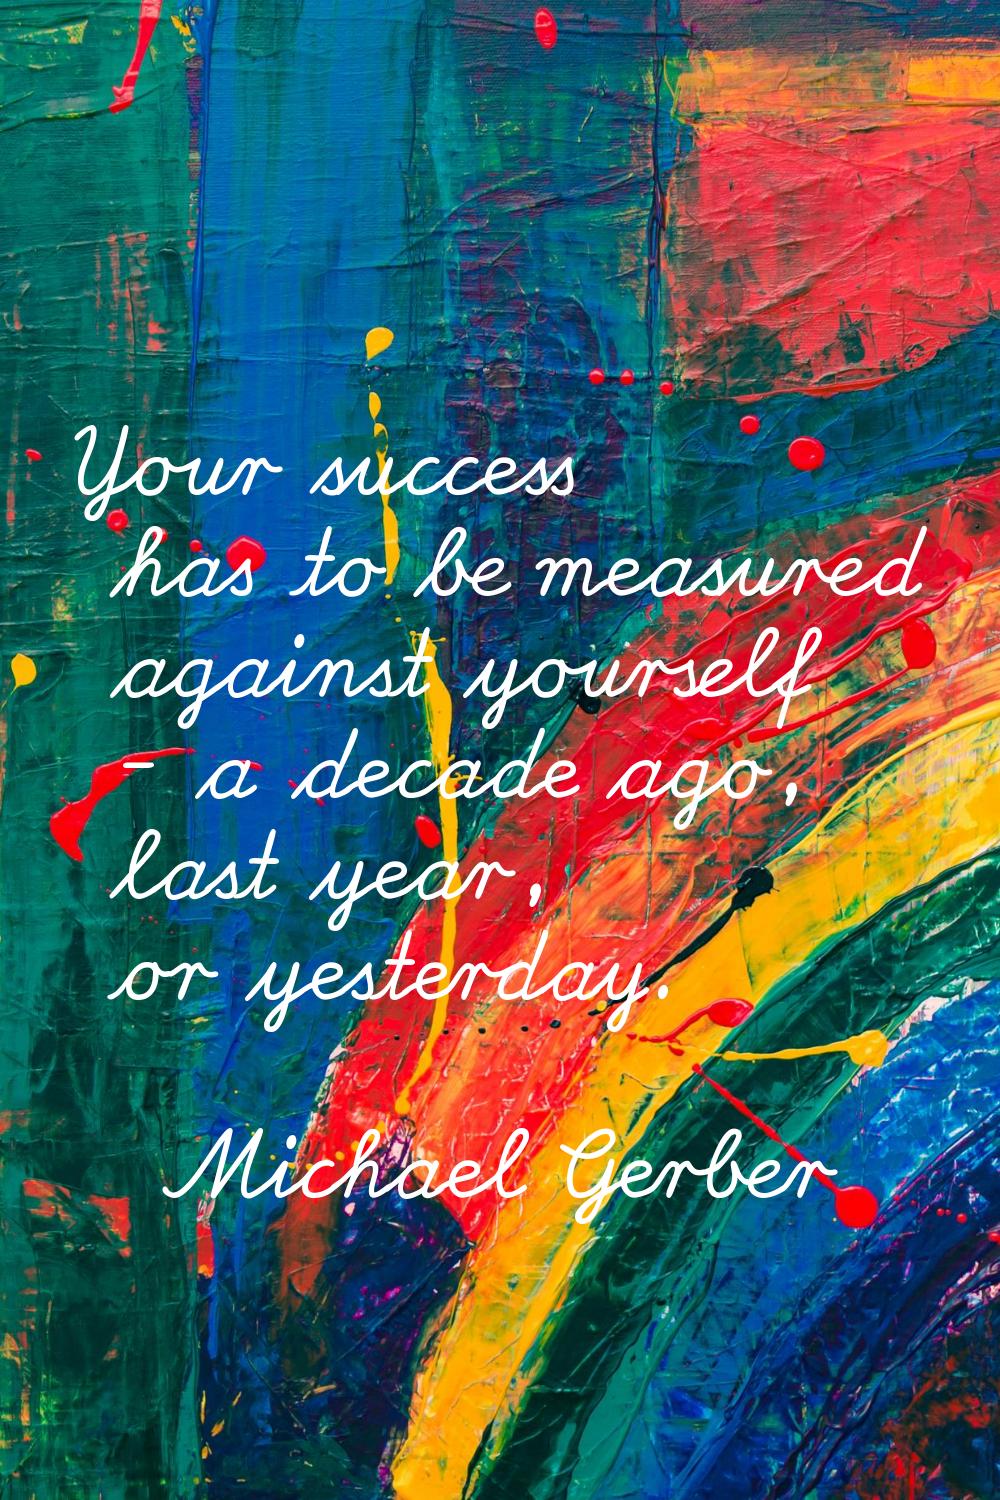 Your success has to be measured against yourself - a decade ago, last year, or yesterday.